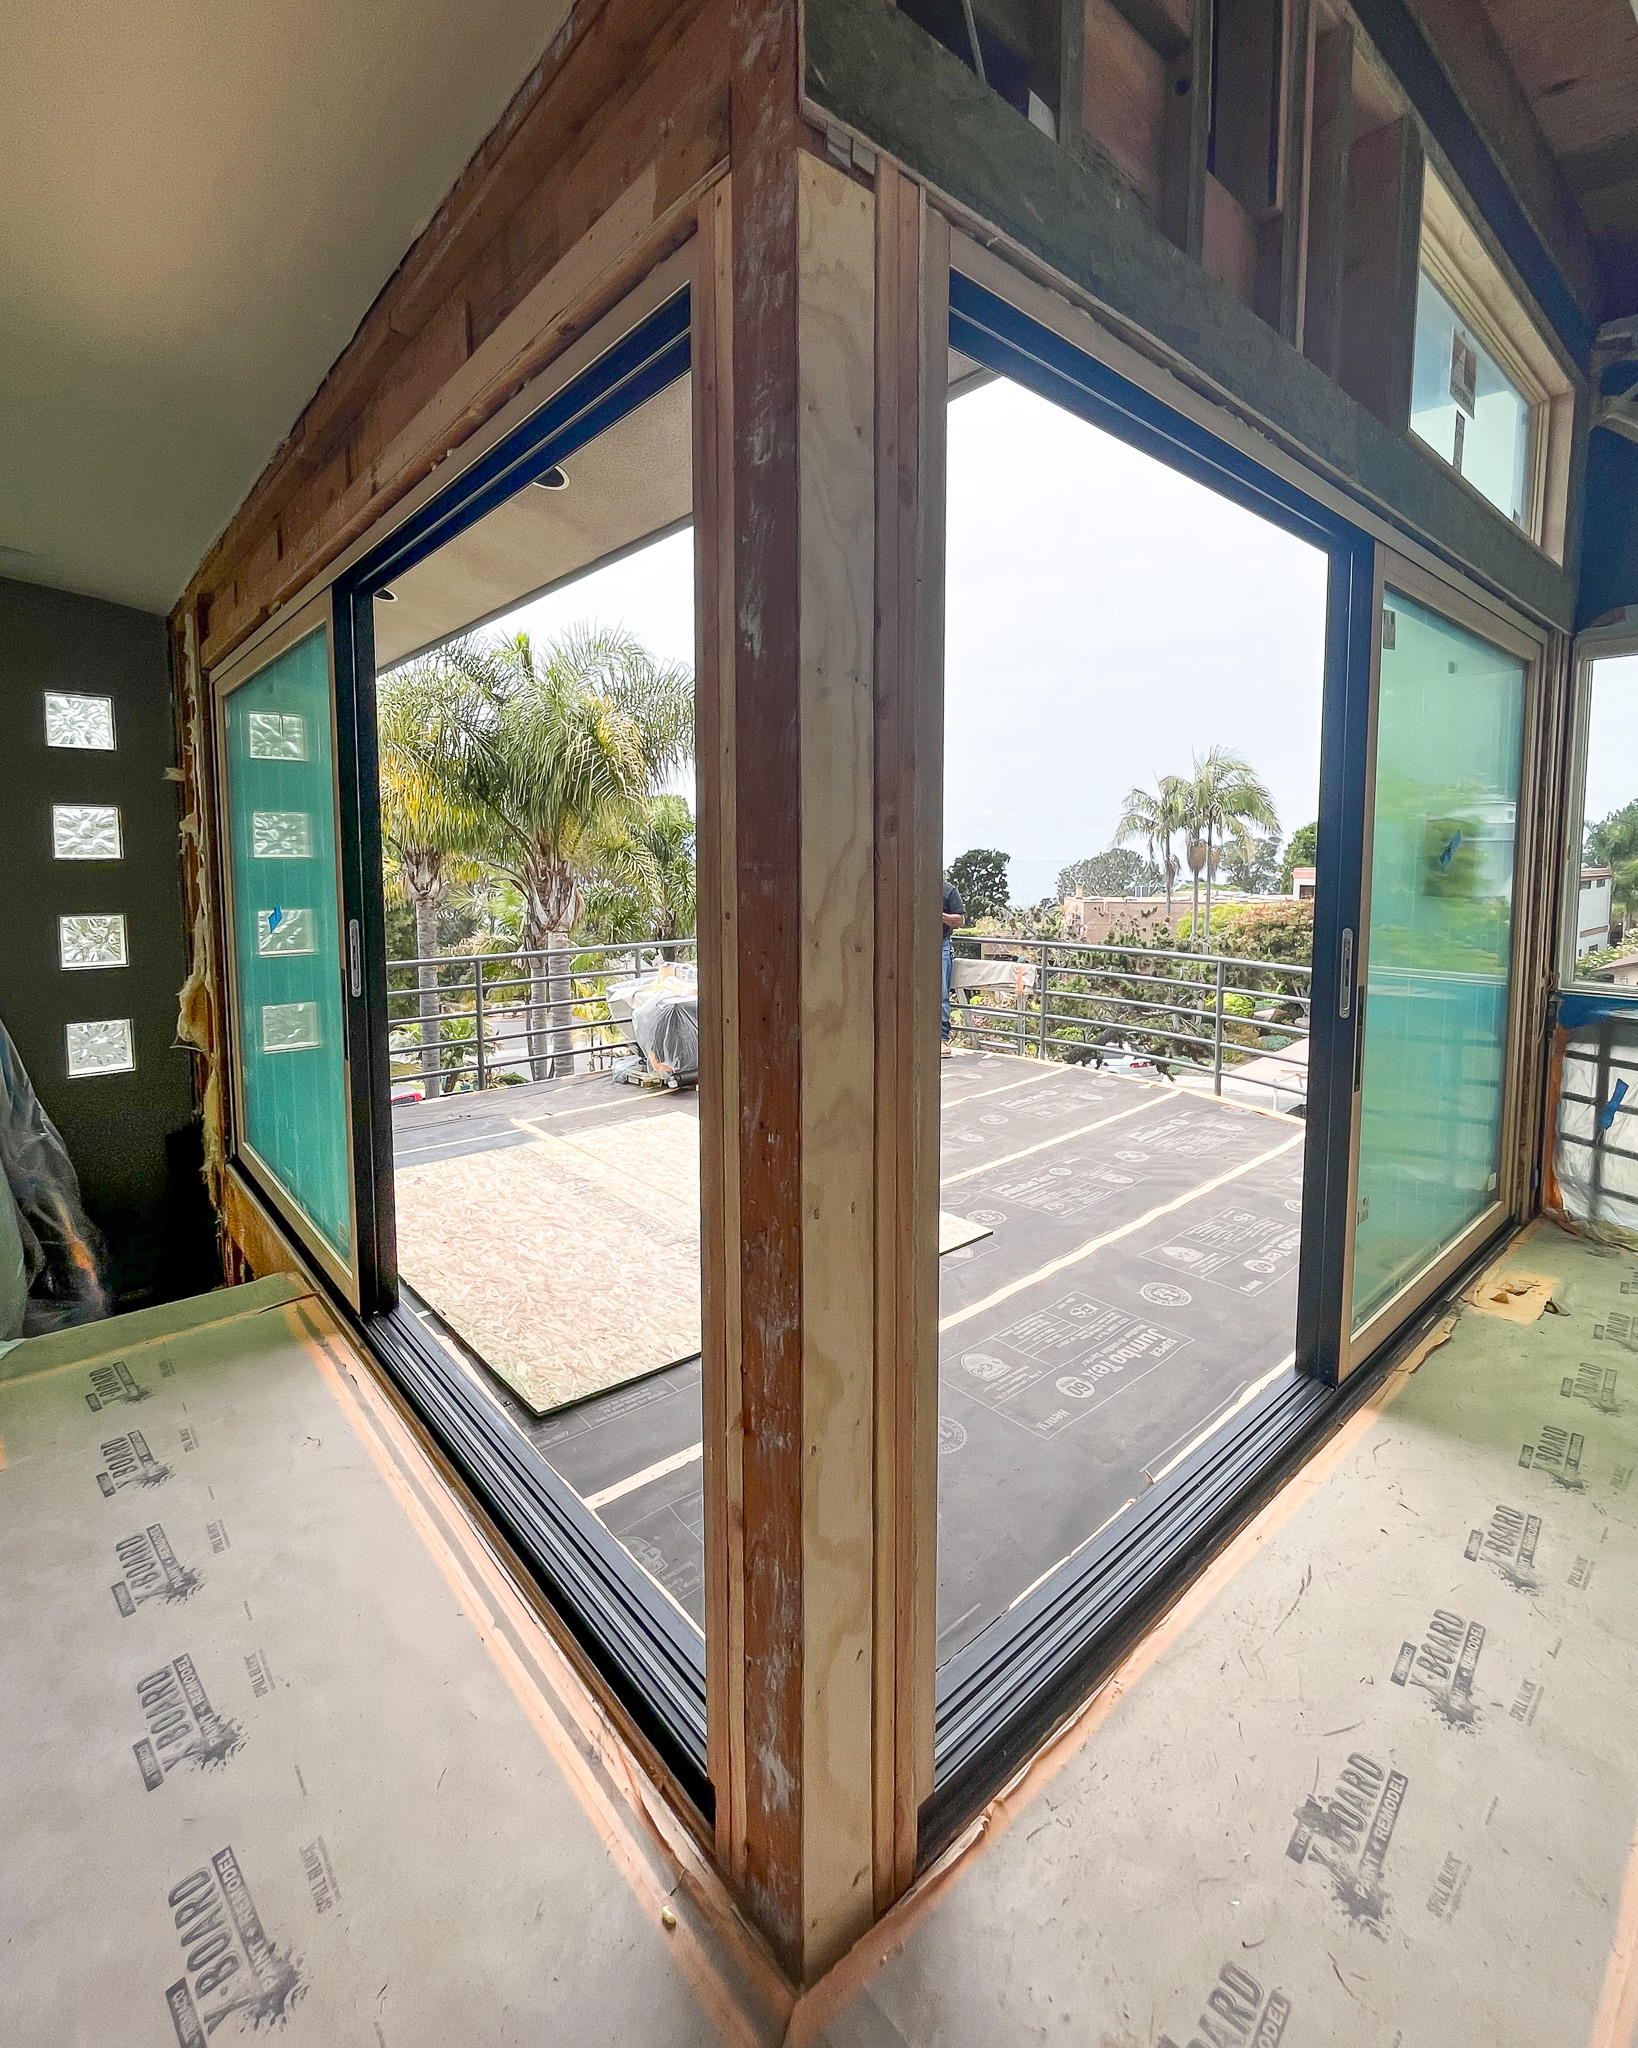 View from inside a room under construction with open glass folding doors leading to a balcony overlooking a garden.